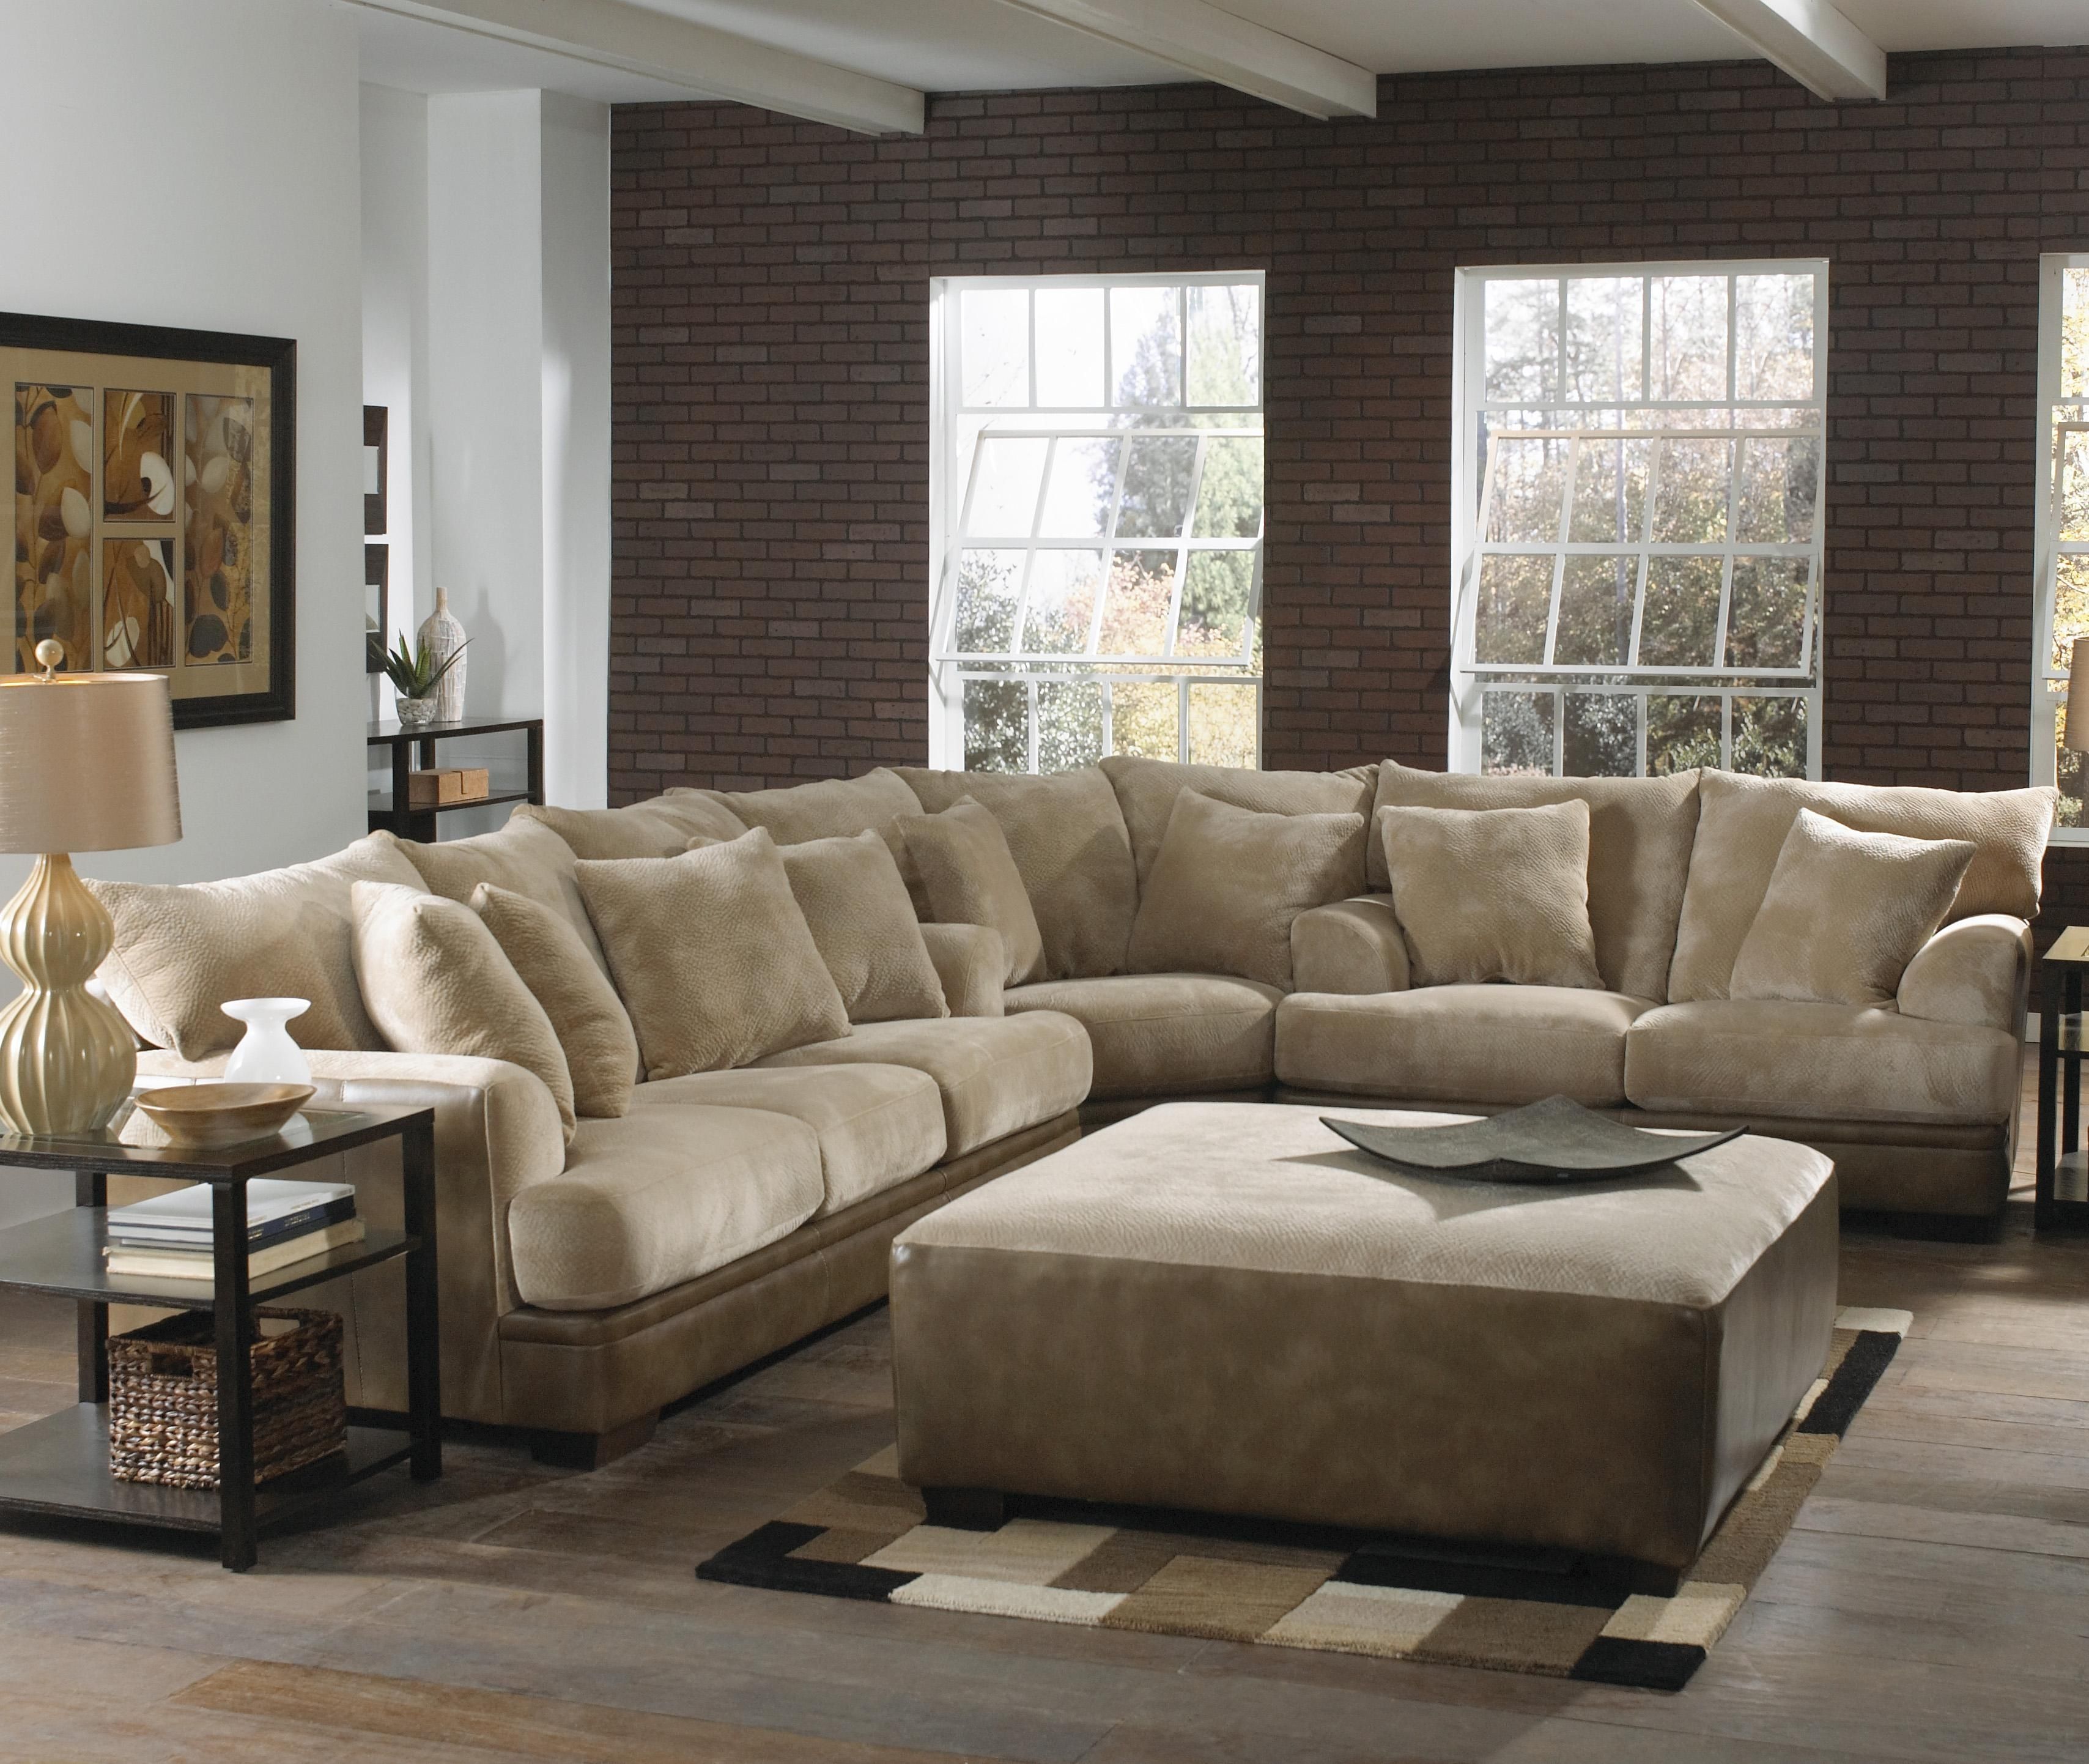 Best Of Sectional Sofas At The Brick – Sectional Sofas For Sectional Sofas At The Brick (Photo 6 of 15)